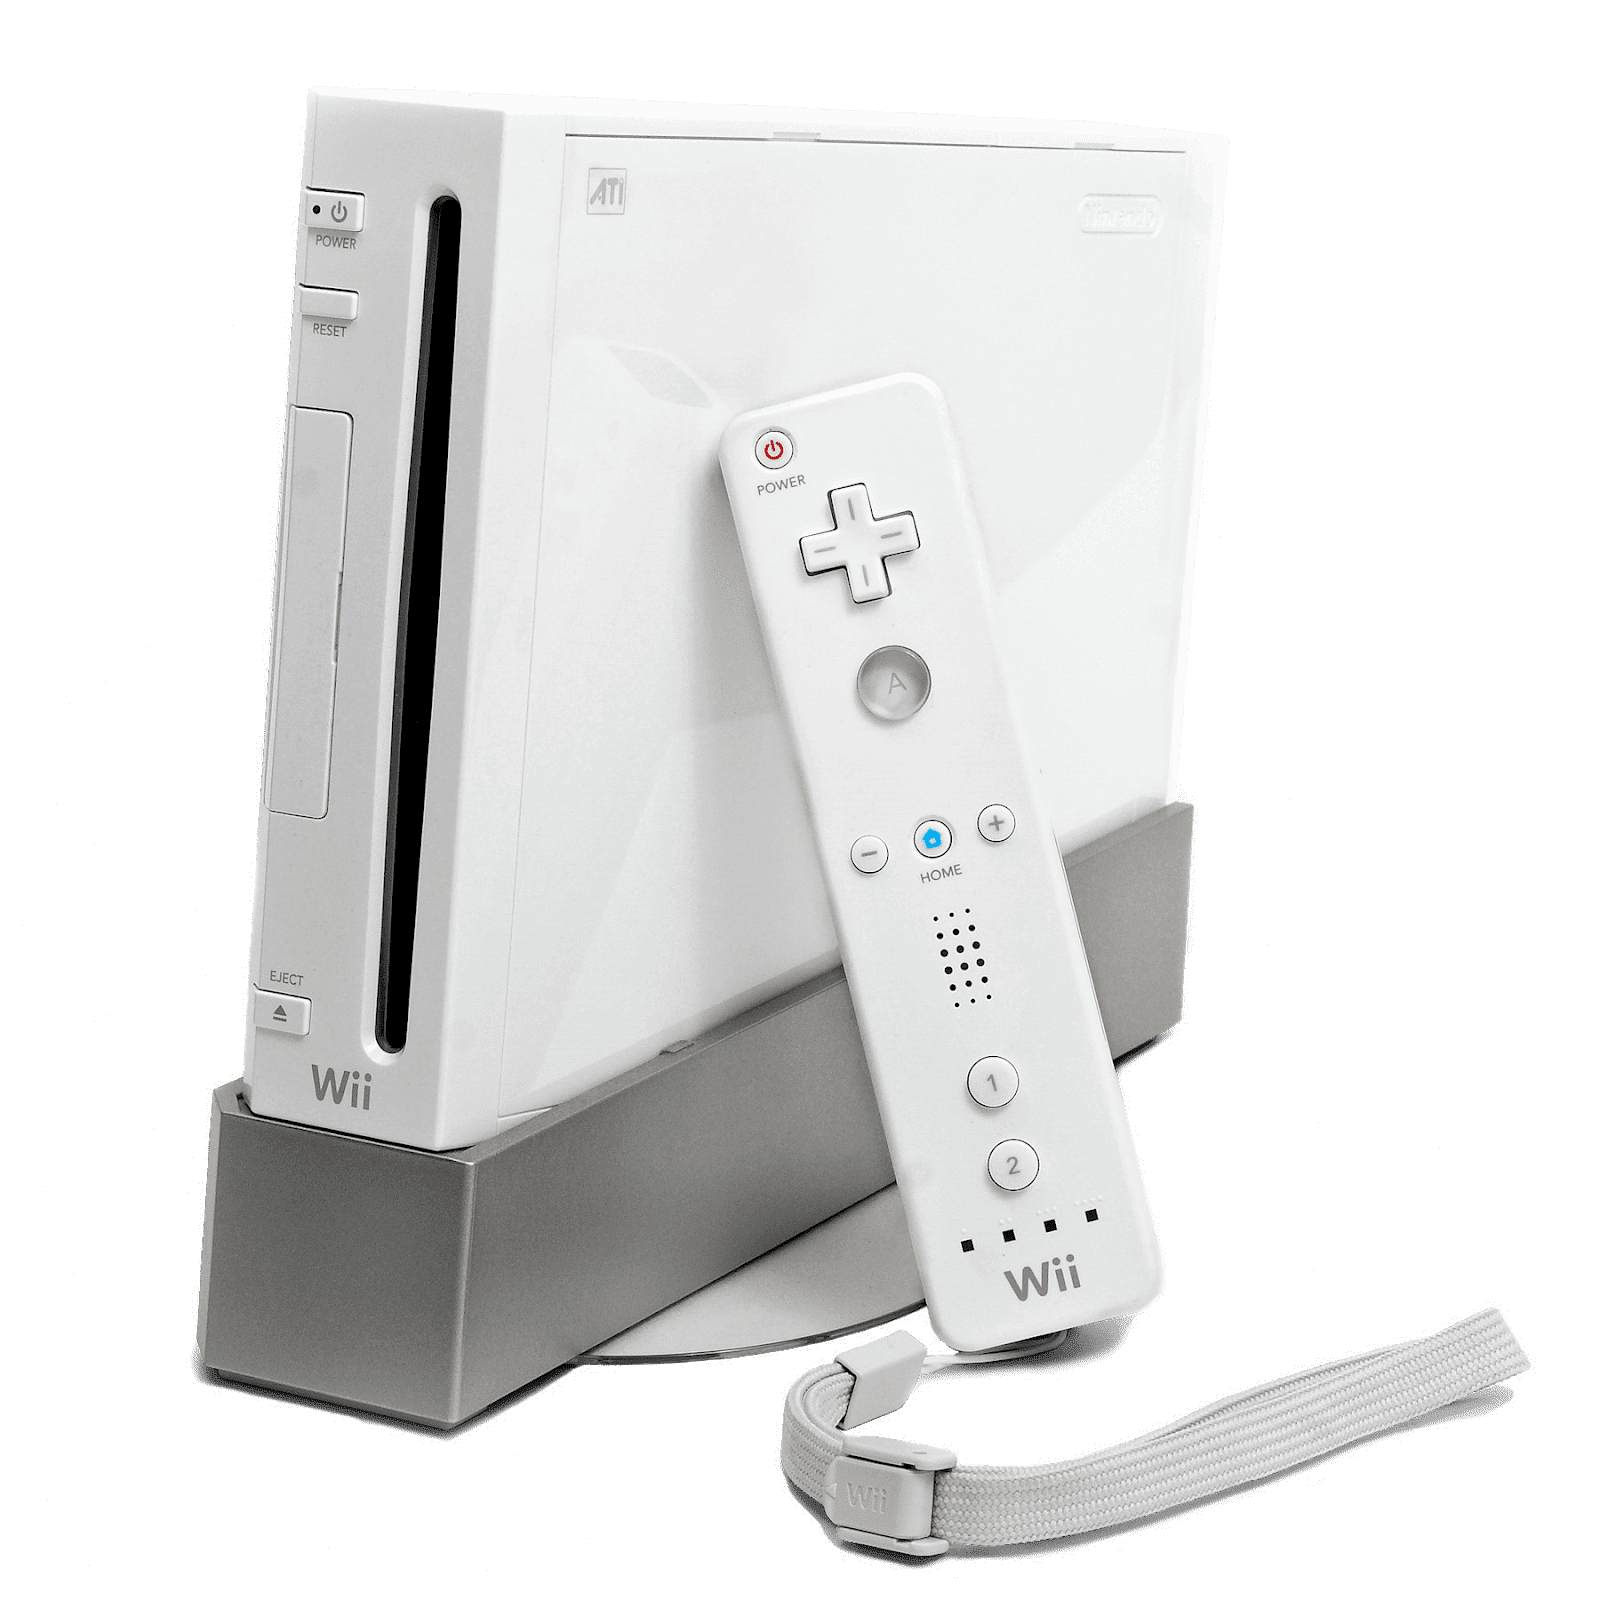 Nintendo Is Shutting Down Video Streaming Services On Wii Early 2019